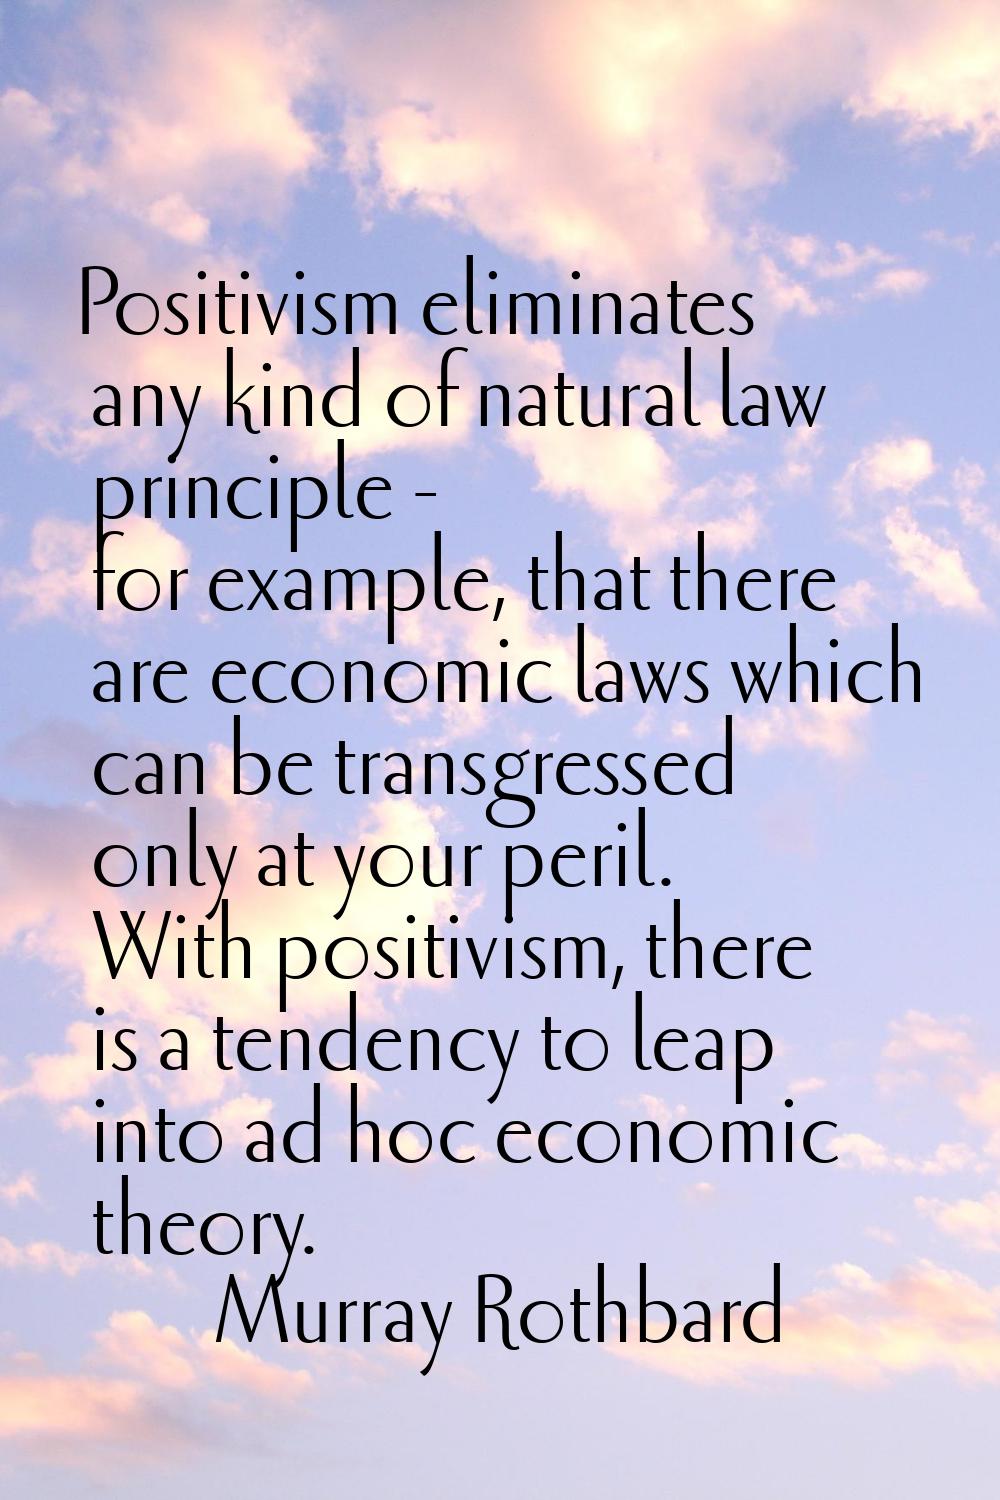 Positivism eliminates any kind of natural law principle - for example, that there are economic laws